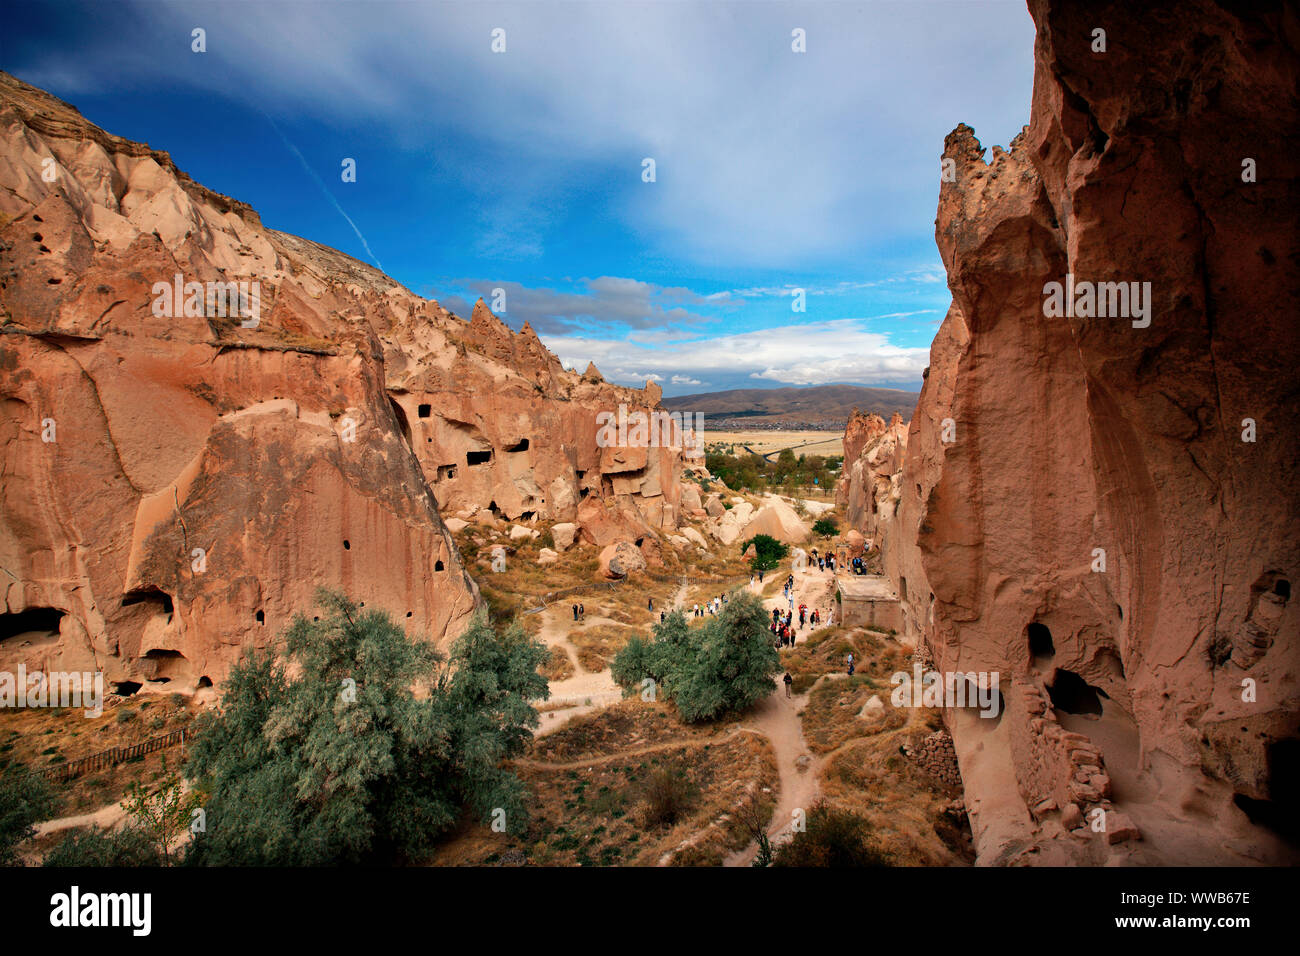 Partial view of the National Park of Zelve Valley, Nevsehir, Cappadocia, Turkey. Stock Photo